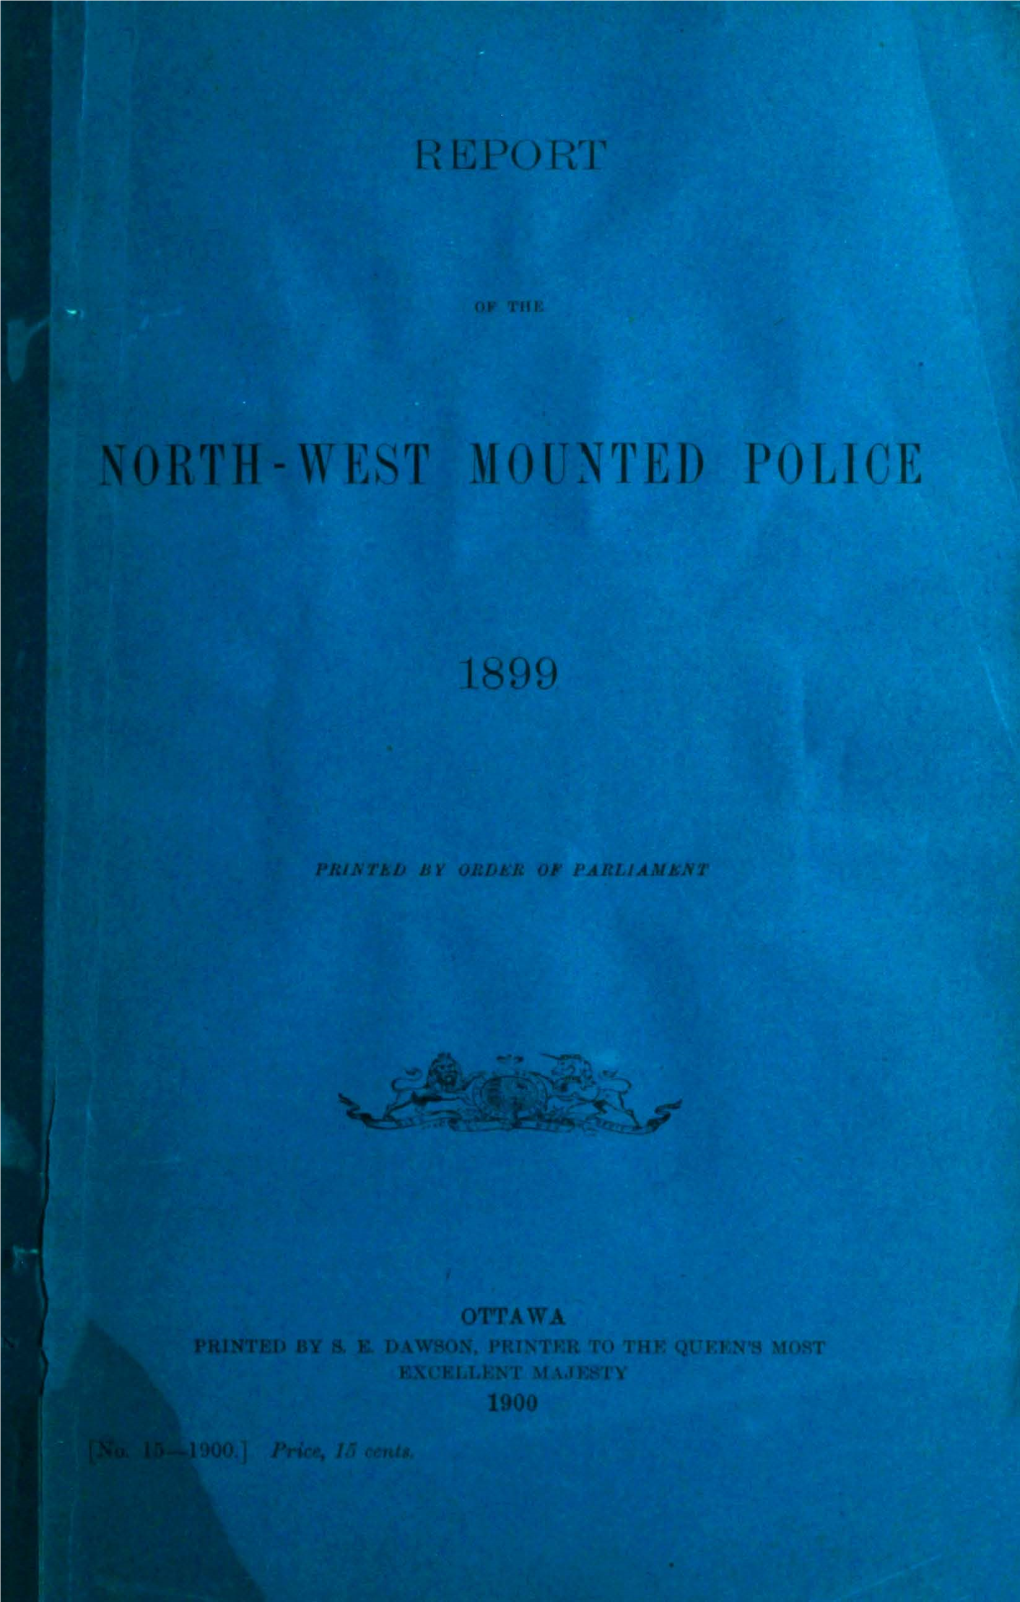 North-West Mounted Police 1899